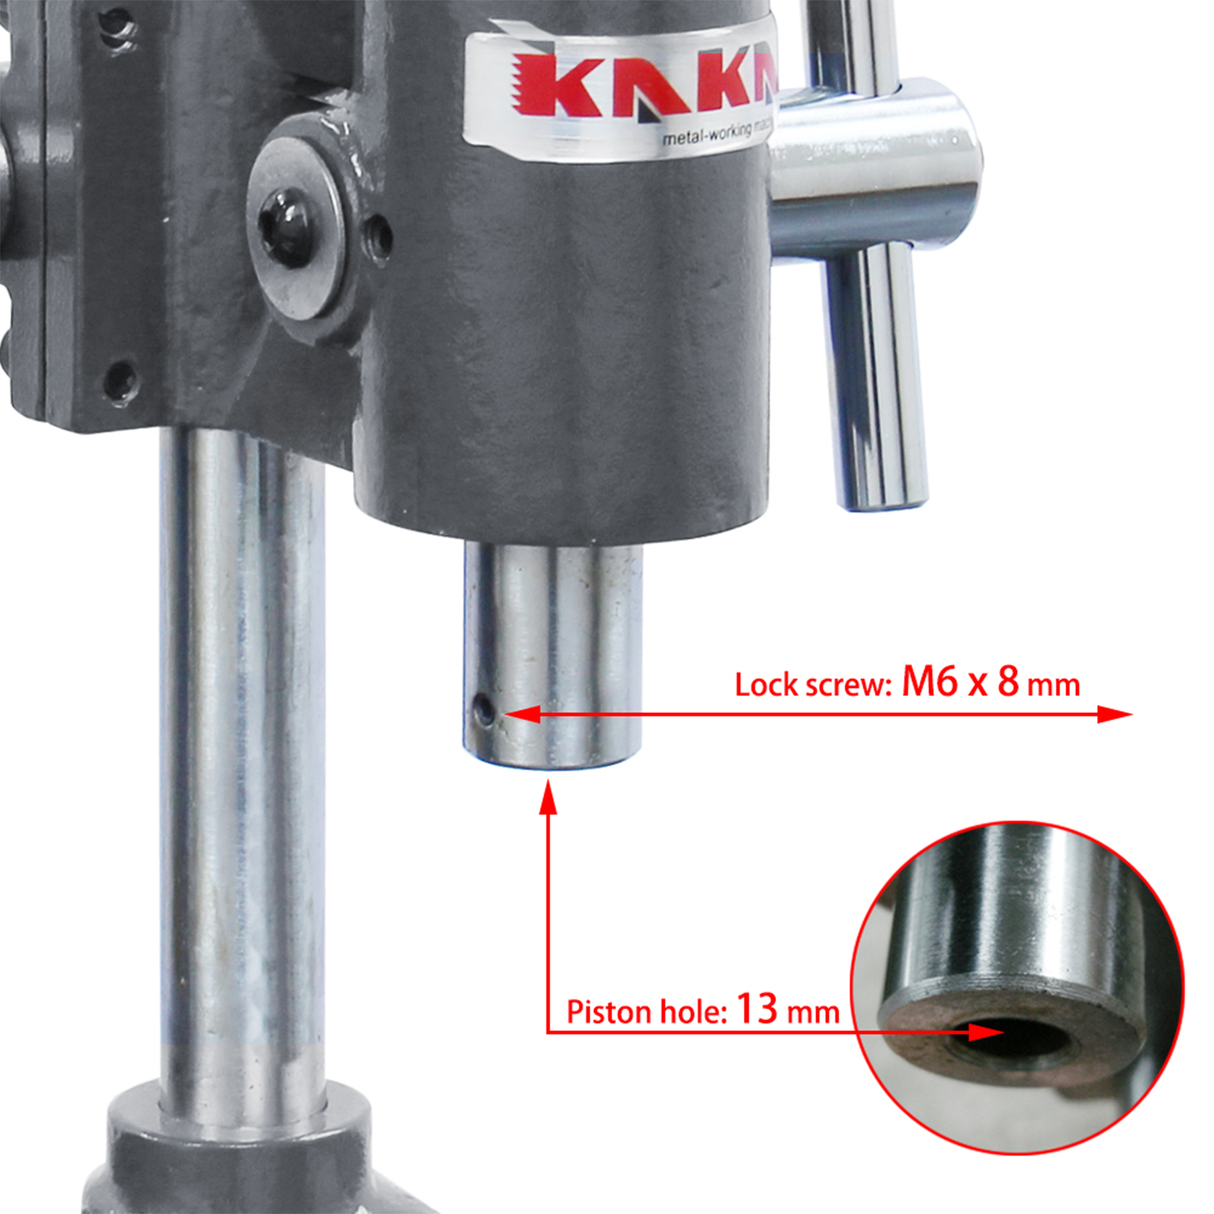 KANG Industrial AP-1S Arbor Press, Solid Construction, 1 Ton Adjust Press Height Jewelry Tools